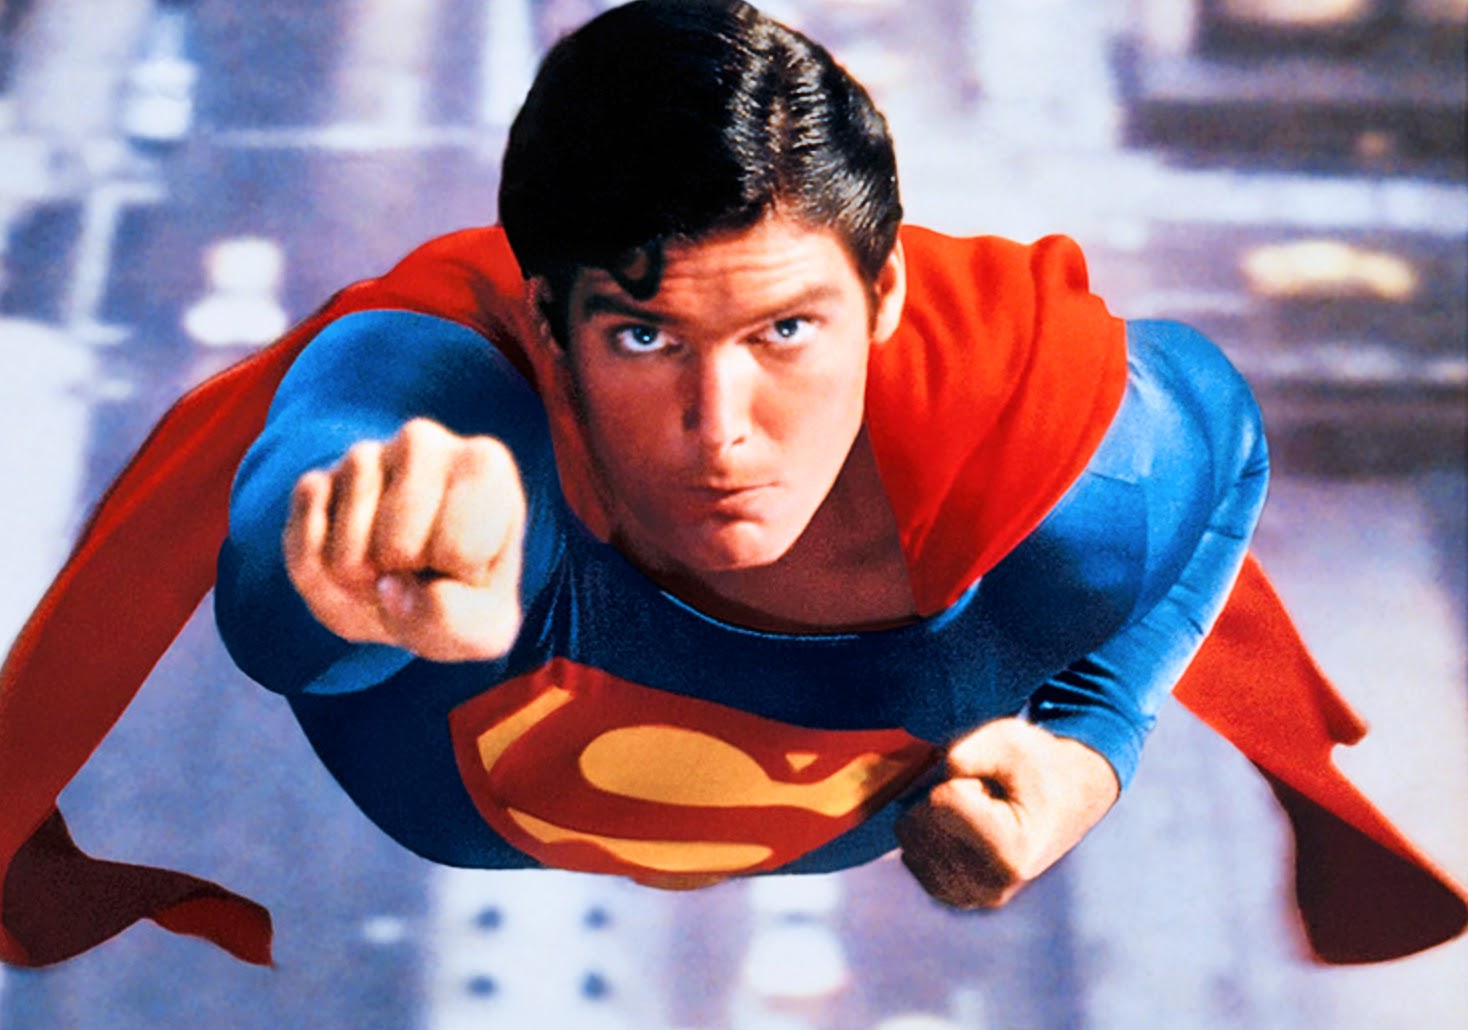 Christopher Reeves, Superman